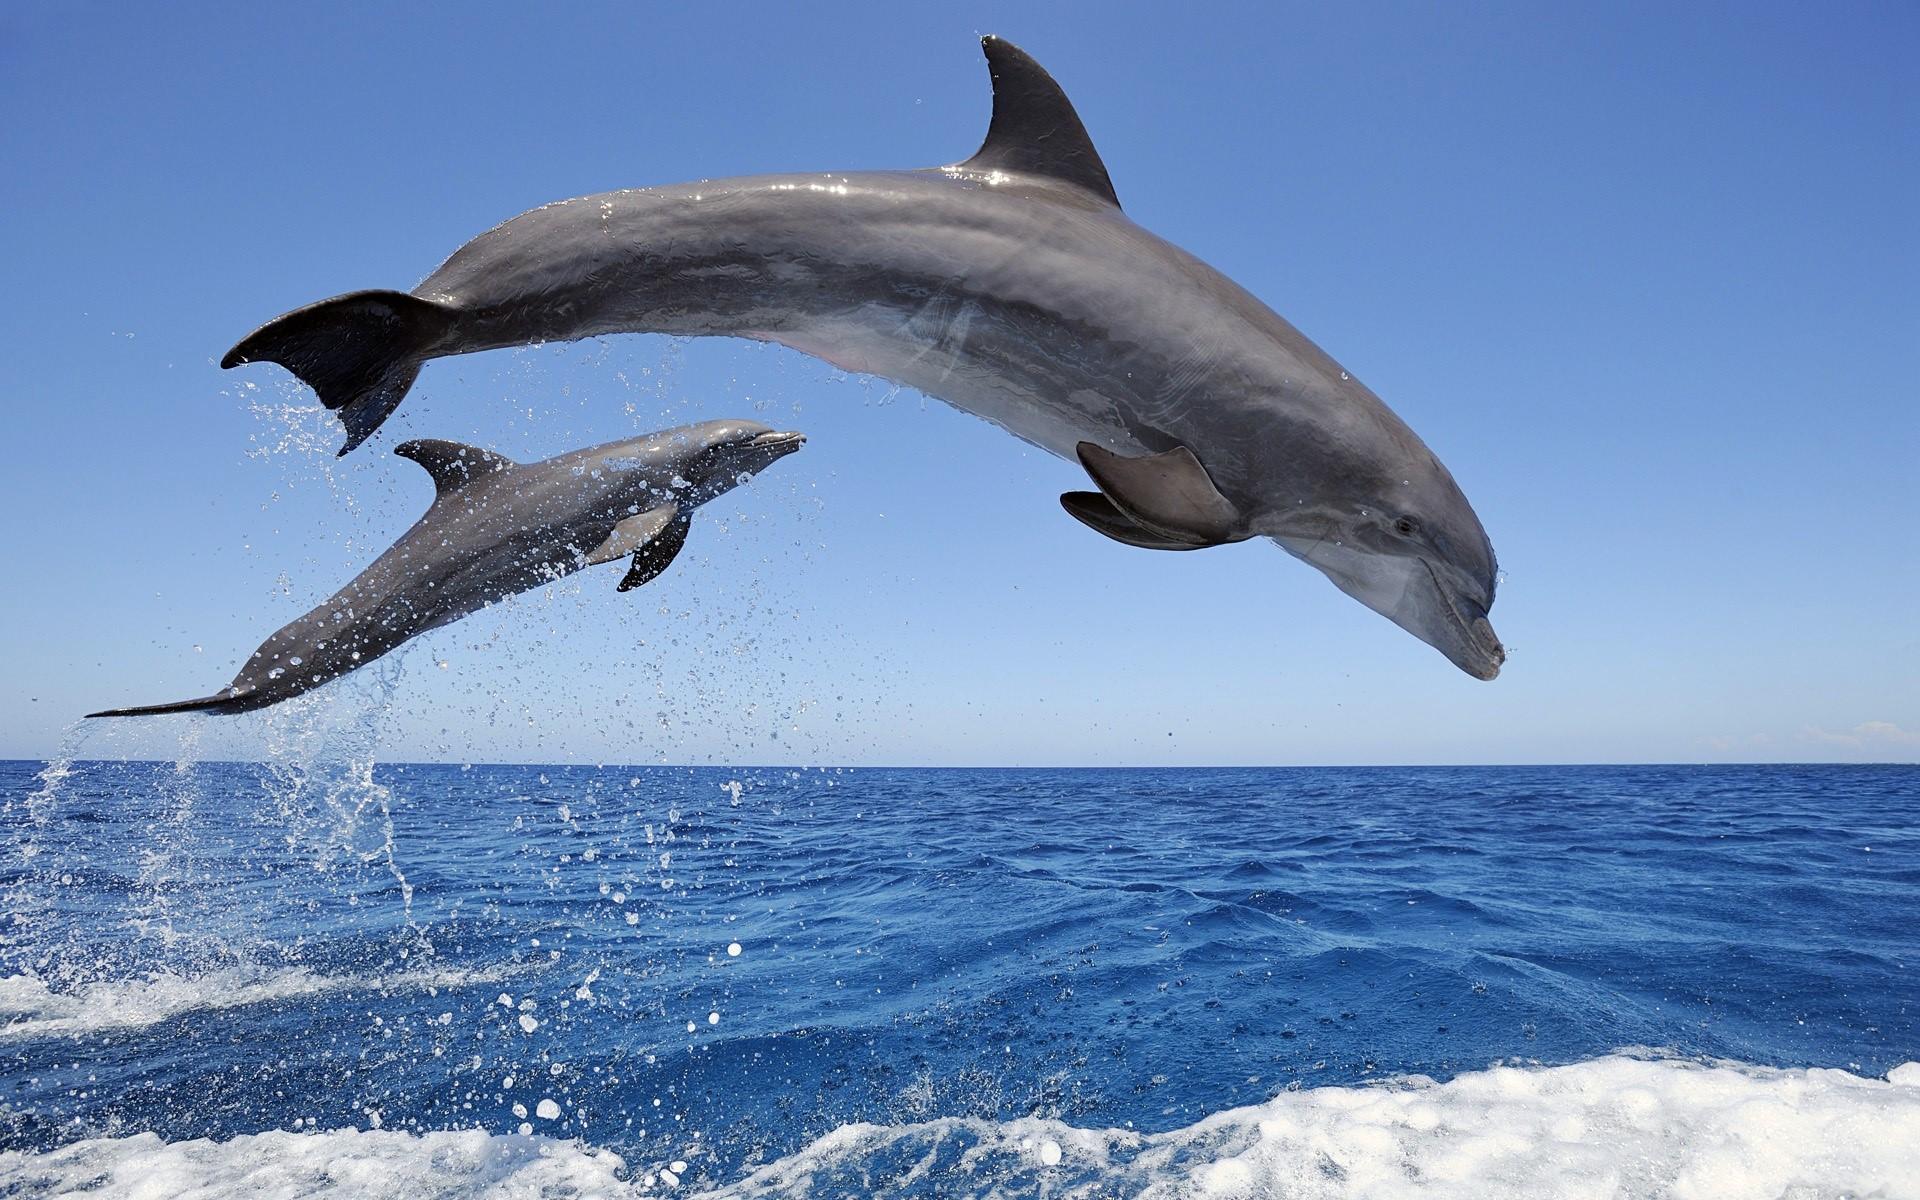 Dolphins jumping out of the water Wallpaper Full HD